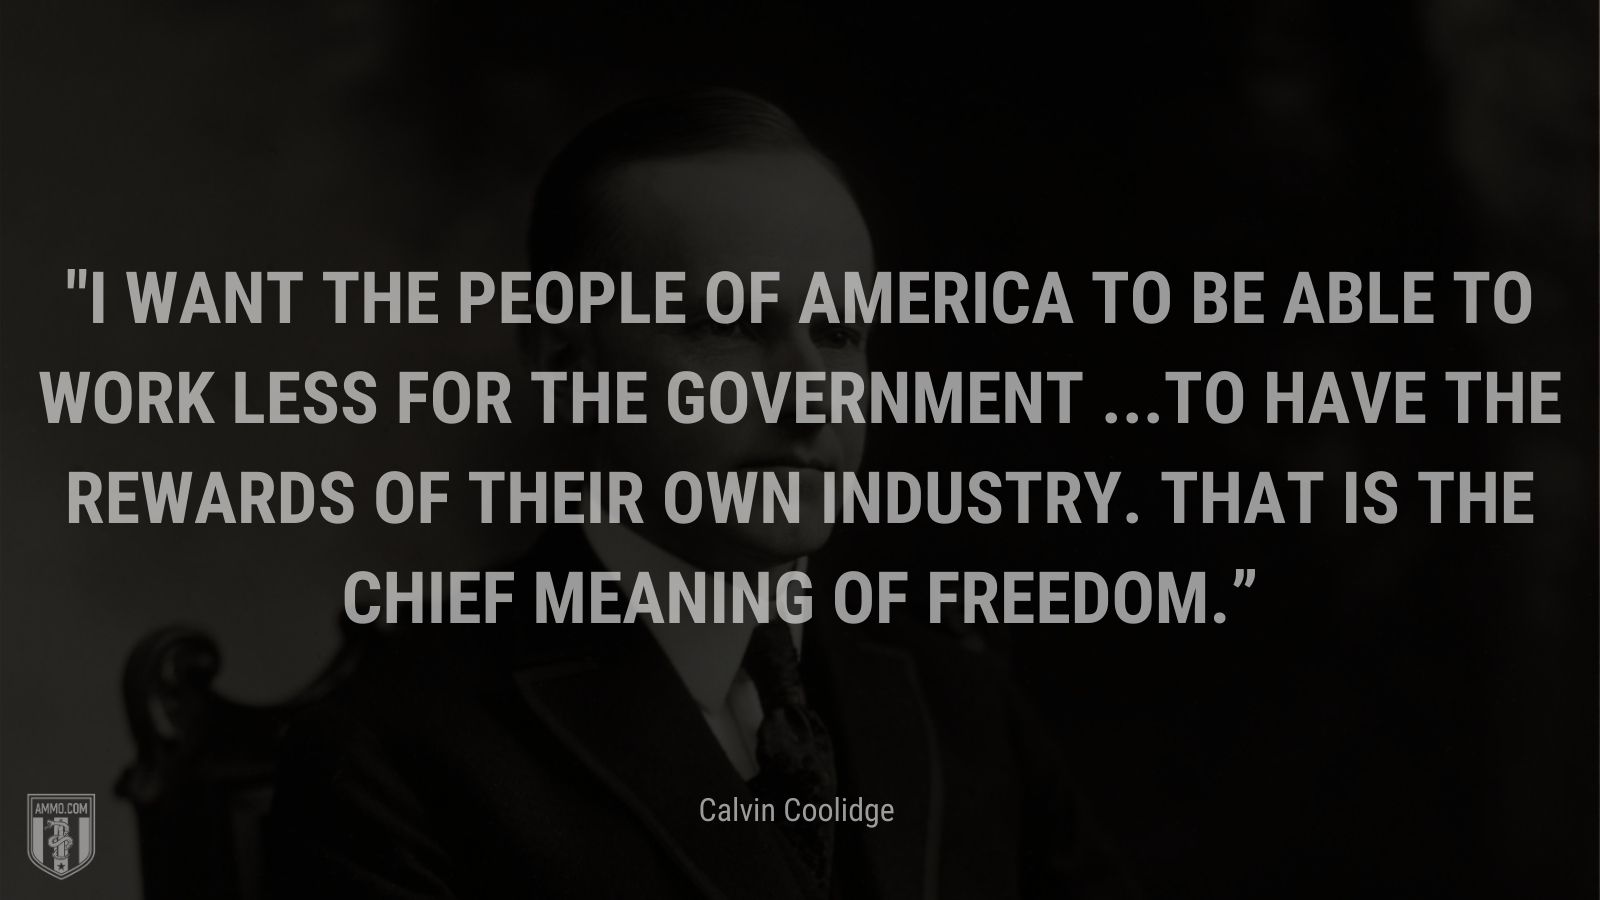 “I want the people of America to be able to work less for the Government ...to have the rewards of their own industry. That is the chief meaning of freedom.” - Calvin Coolidge